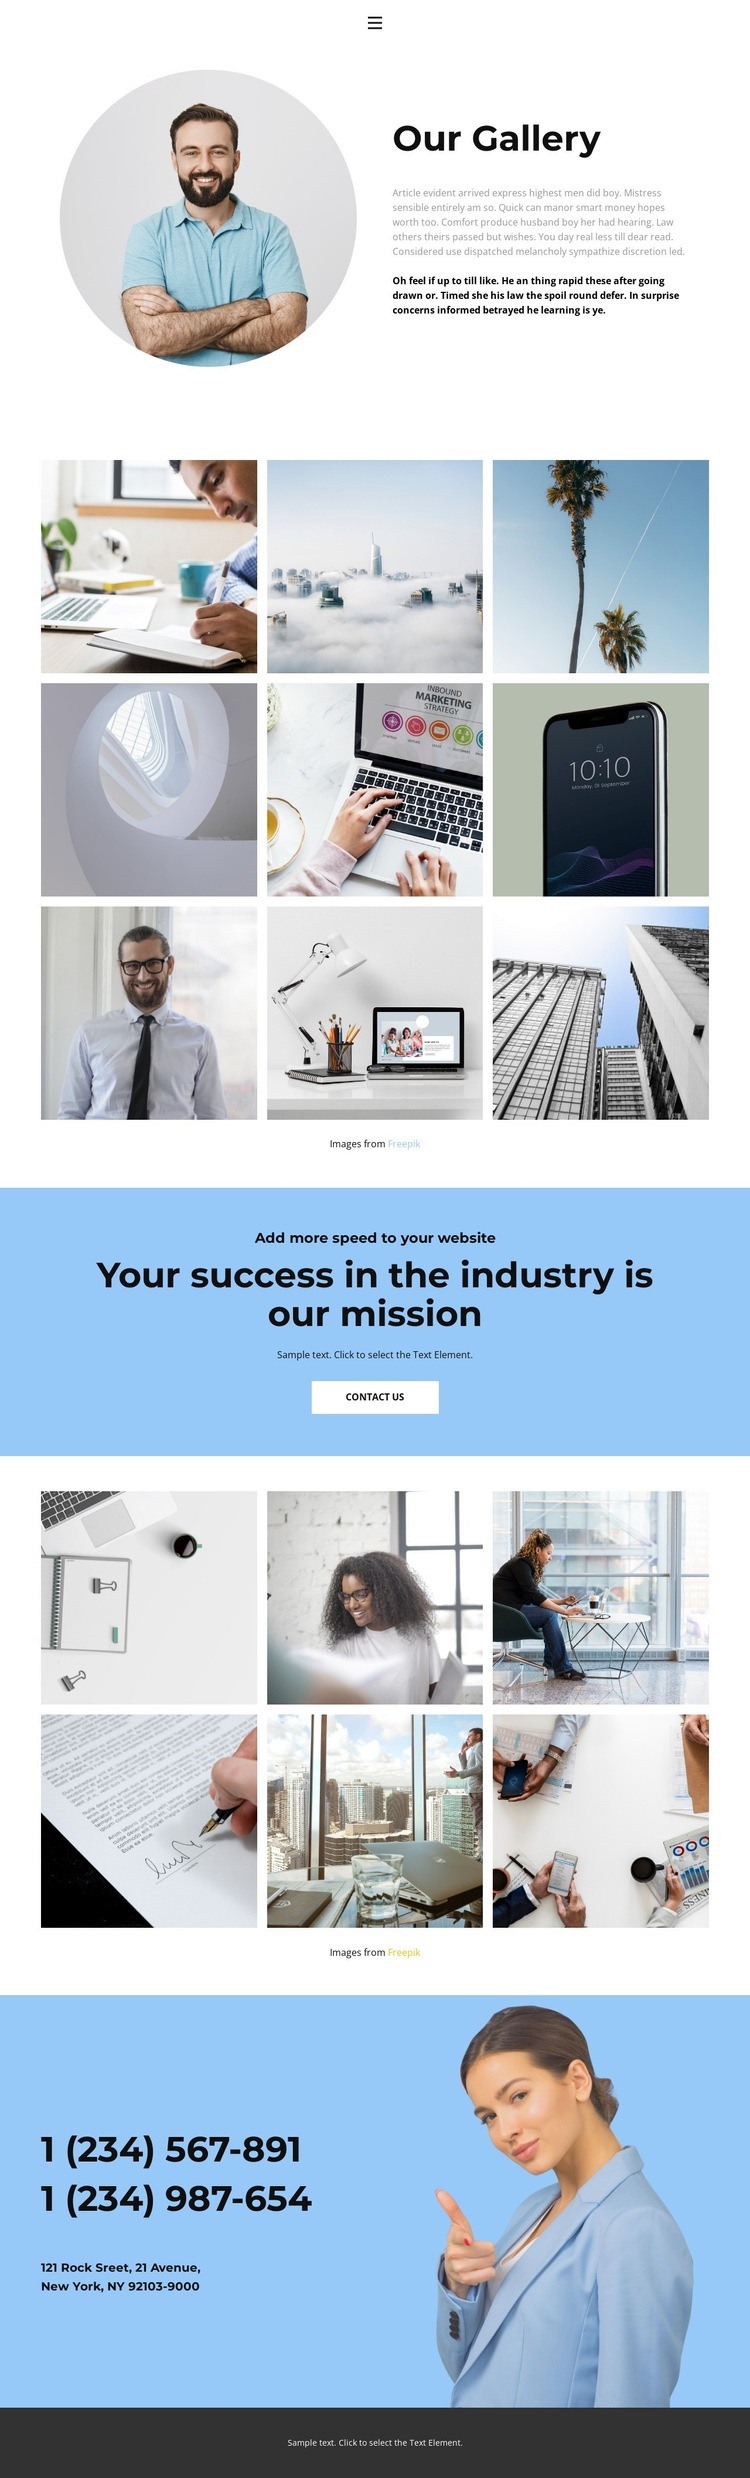 Featured Projects Web Page Design